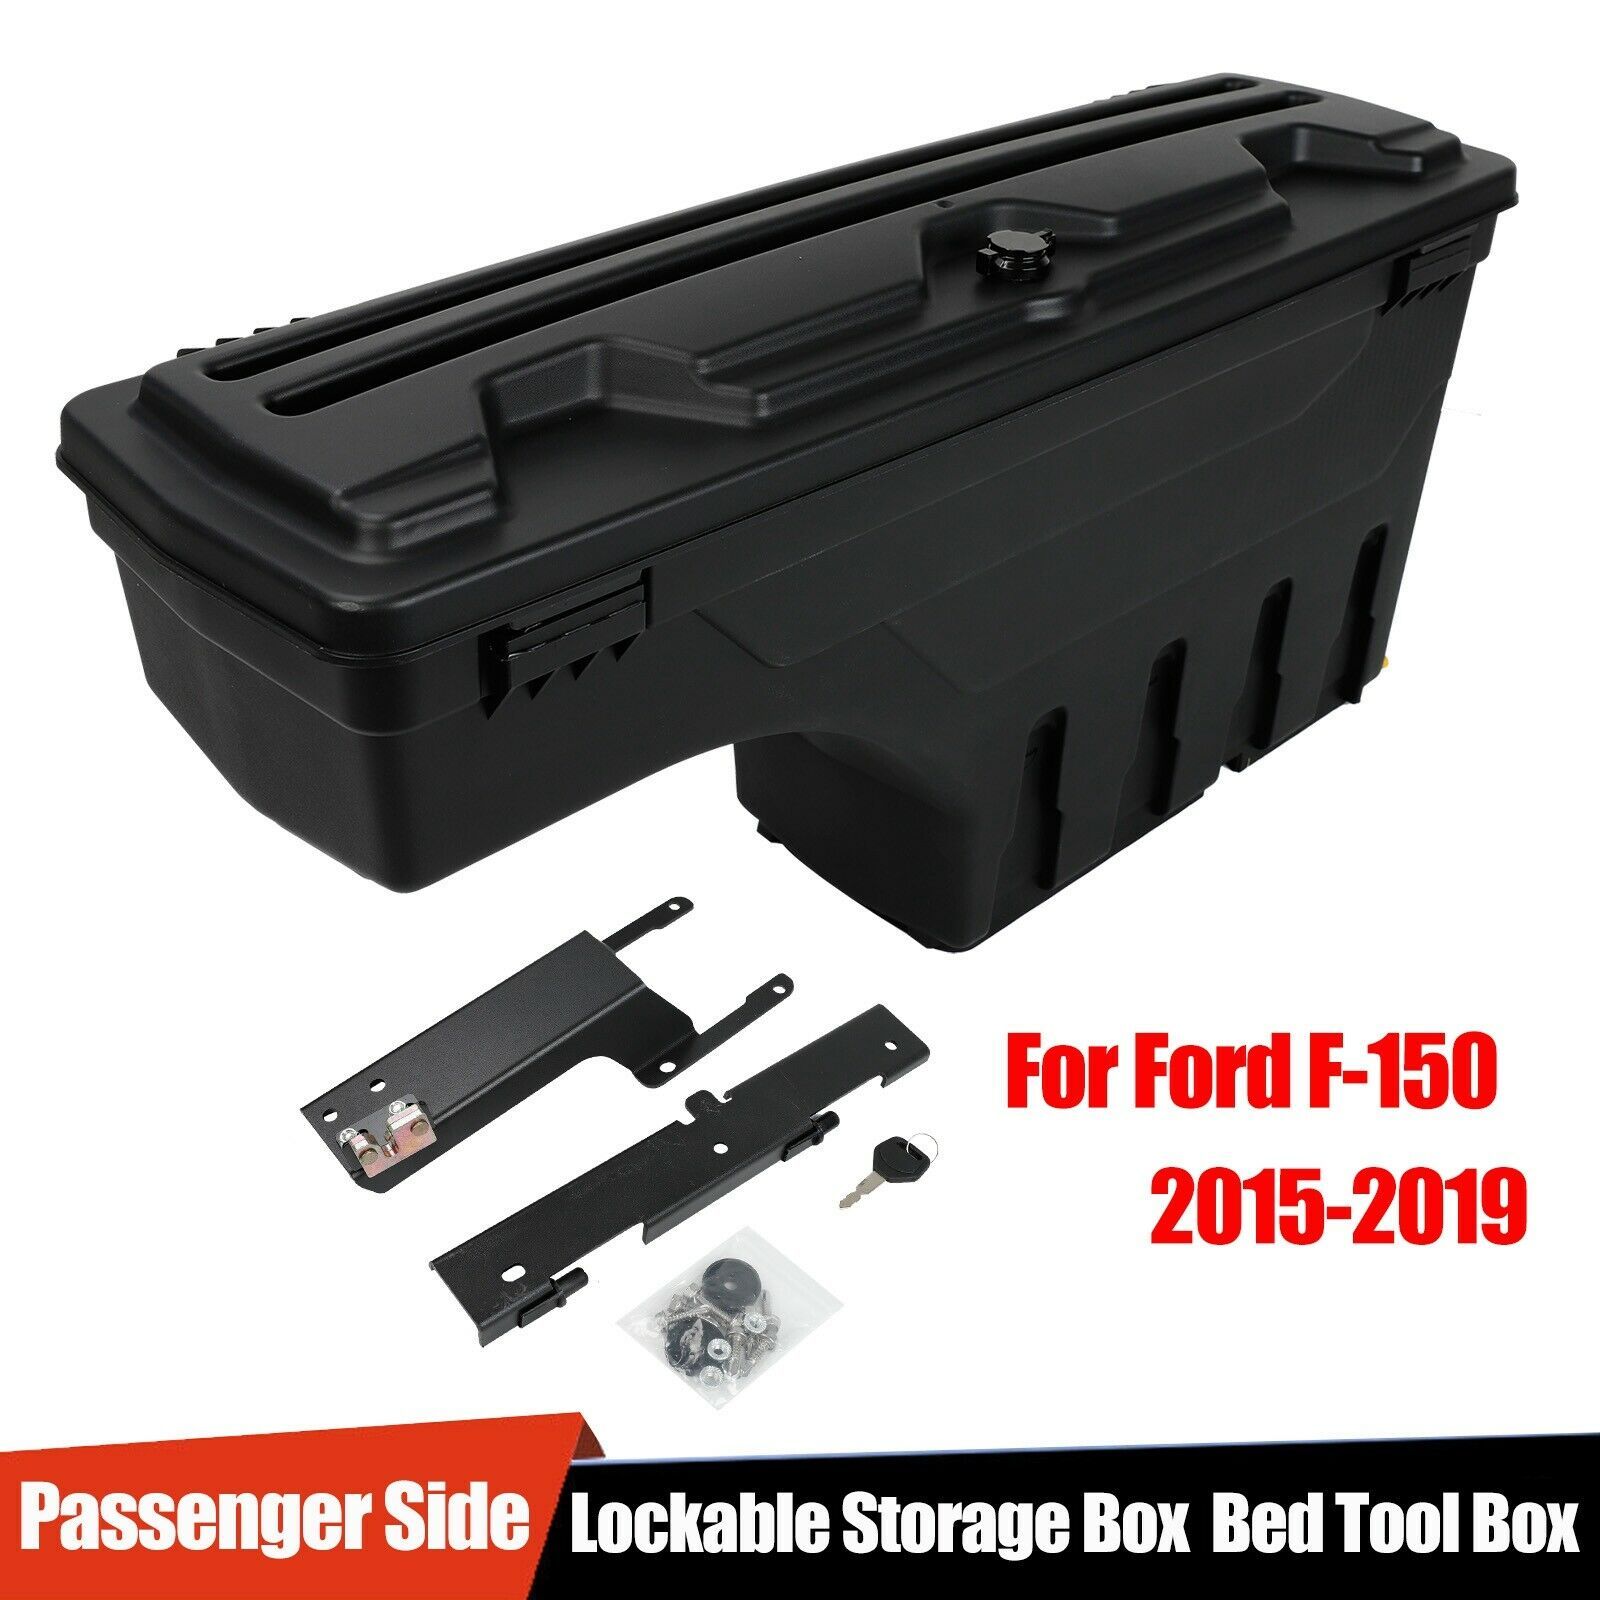 Lockable Storage Box Truck Bed Tool Box Passenger Side For Ford F-150 2015-2019